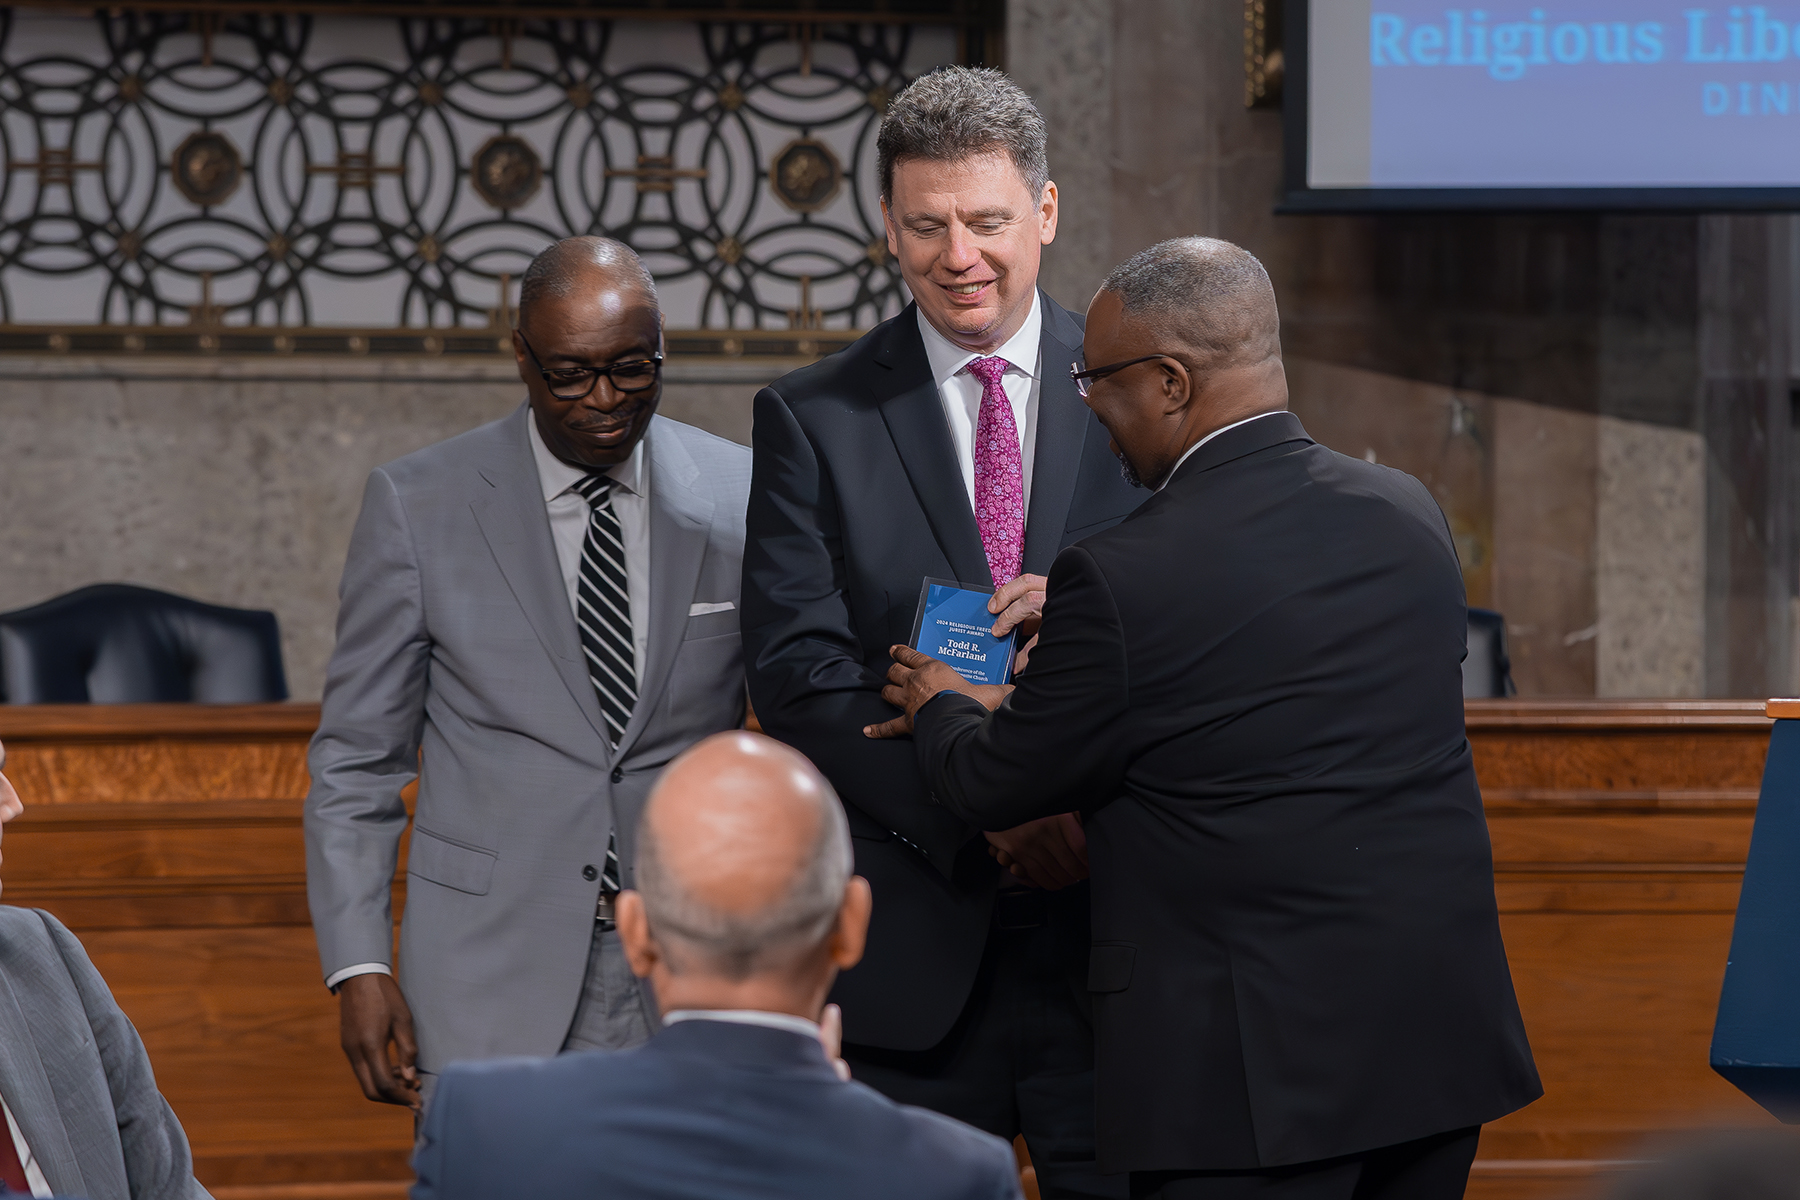 A white man receives an award from a black man as another black man looks on. 